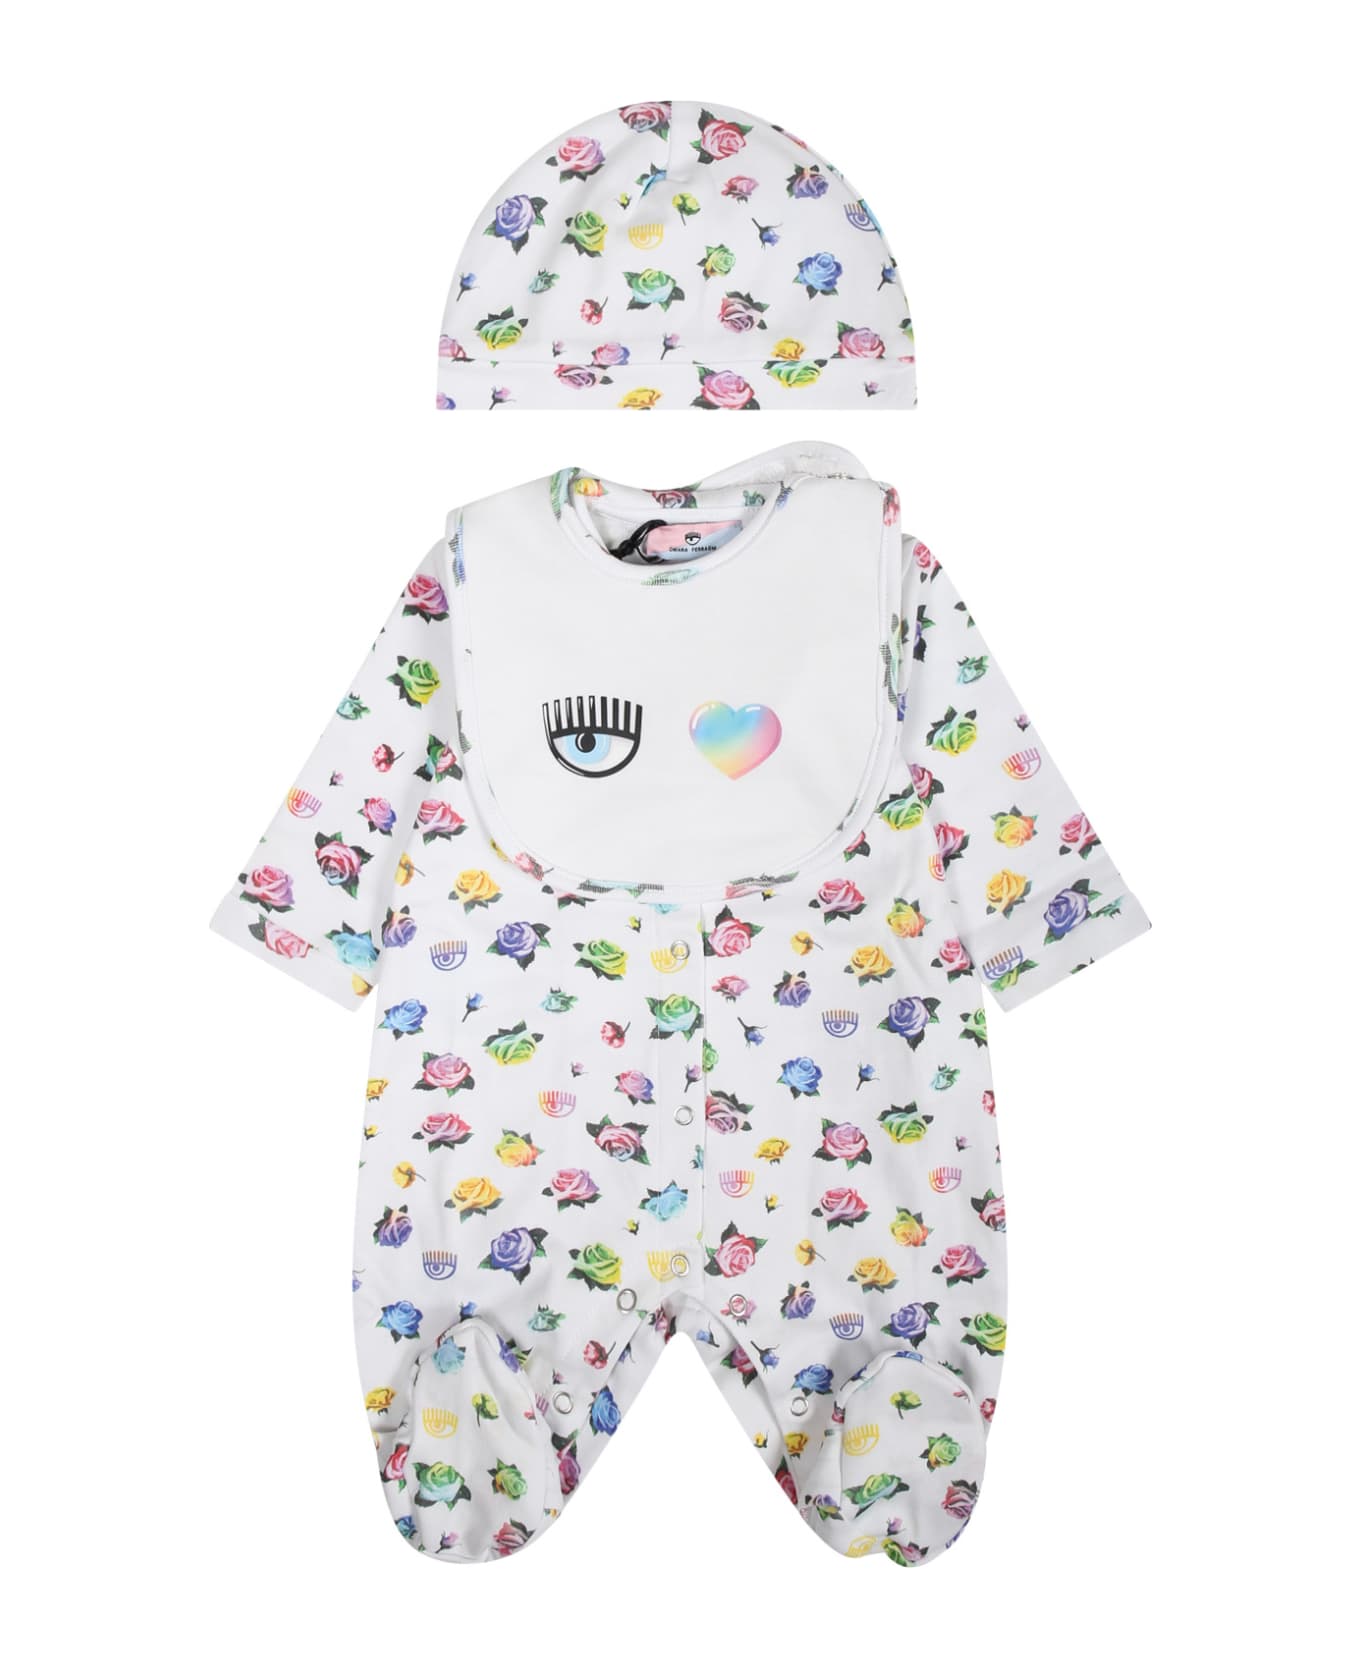 Chiara Ferragni Pink Playsuit For Baby Girl With Flirting Eyes And Multicolor Roses - White ボディスーツ＆セットアップ